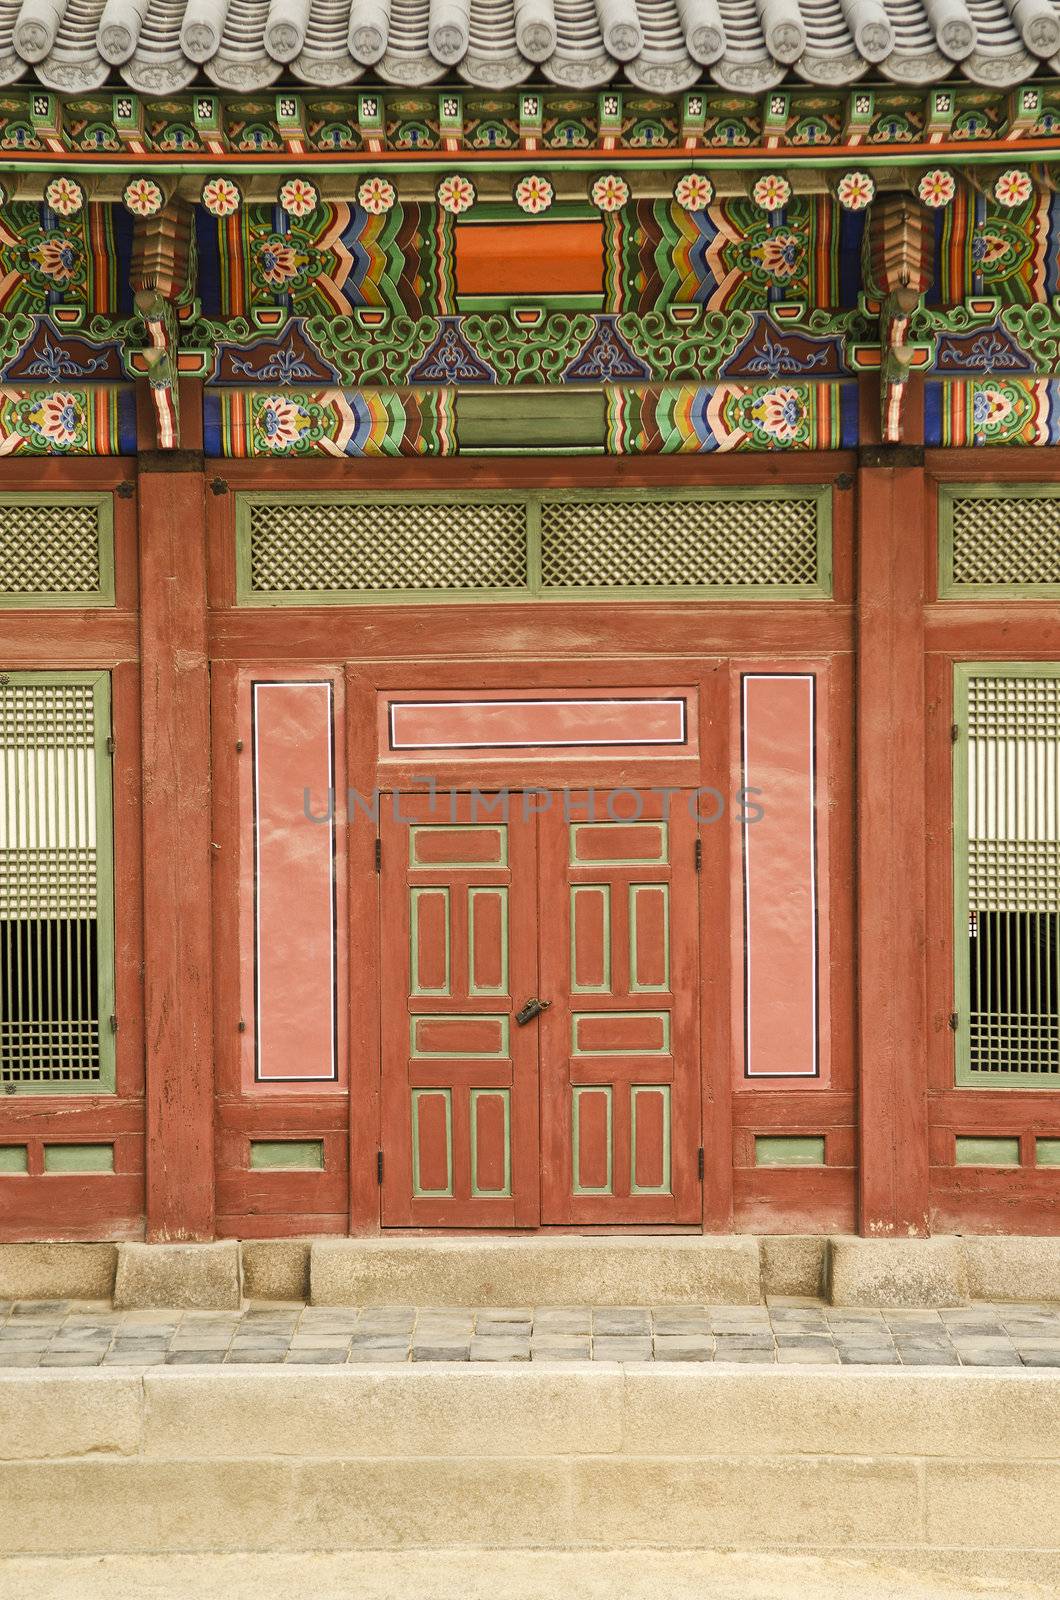 traditional architecture detail in seoul south korea palace